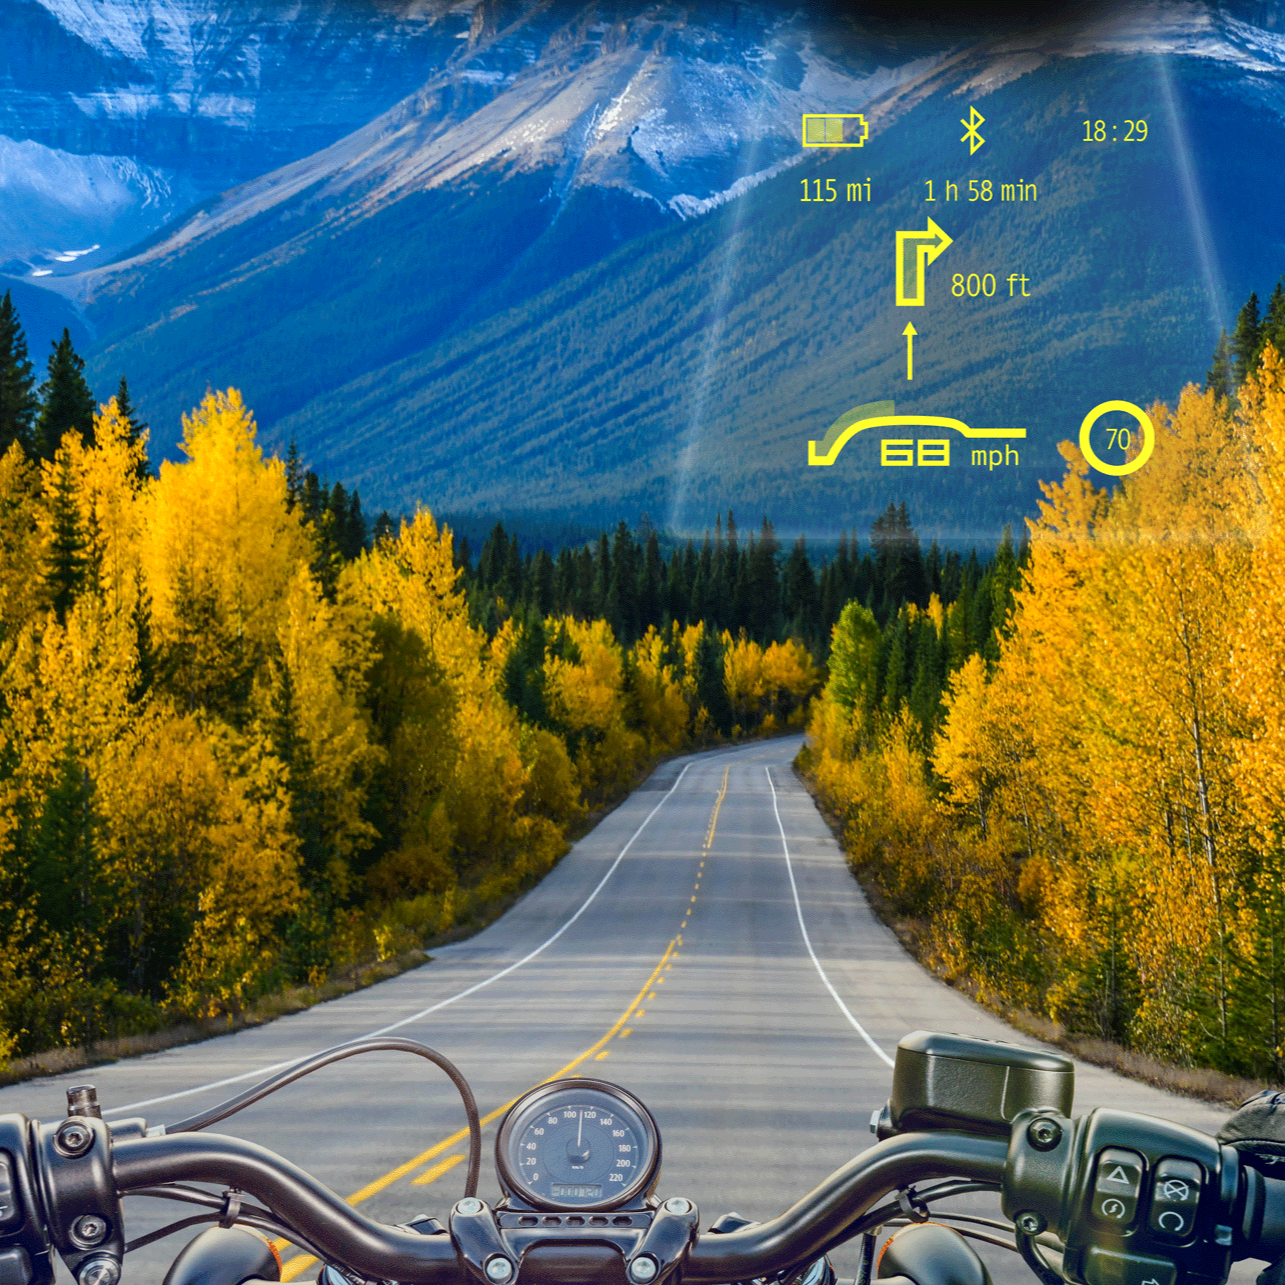 In the Tilsberk Head-Up nDisplay for your motorcycle helmet, you can select which units of measurement are displayed, in this example: mph as well as mi and ft